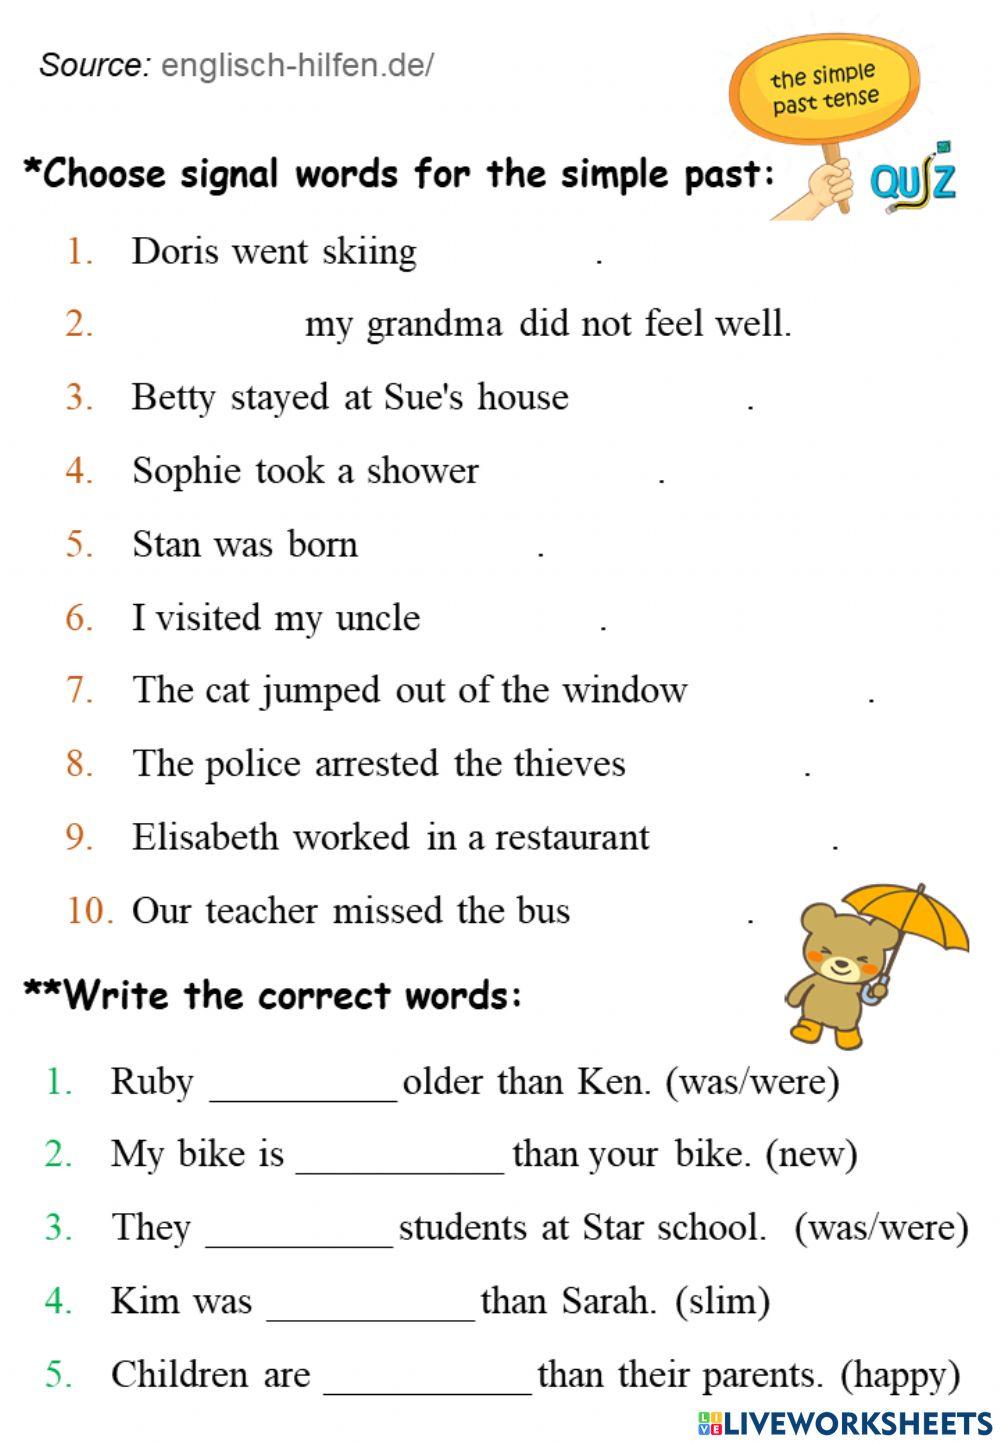 Signal words of the simple past worksheet